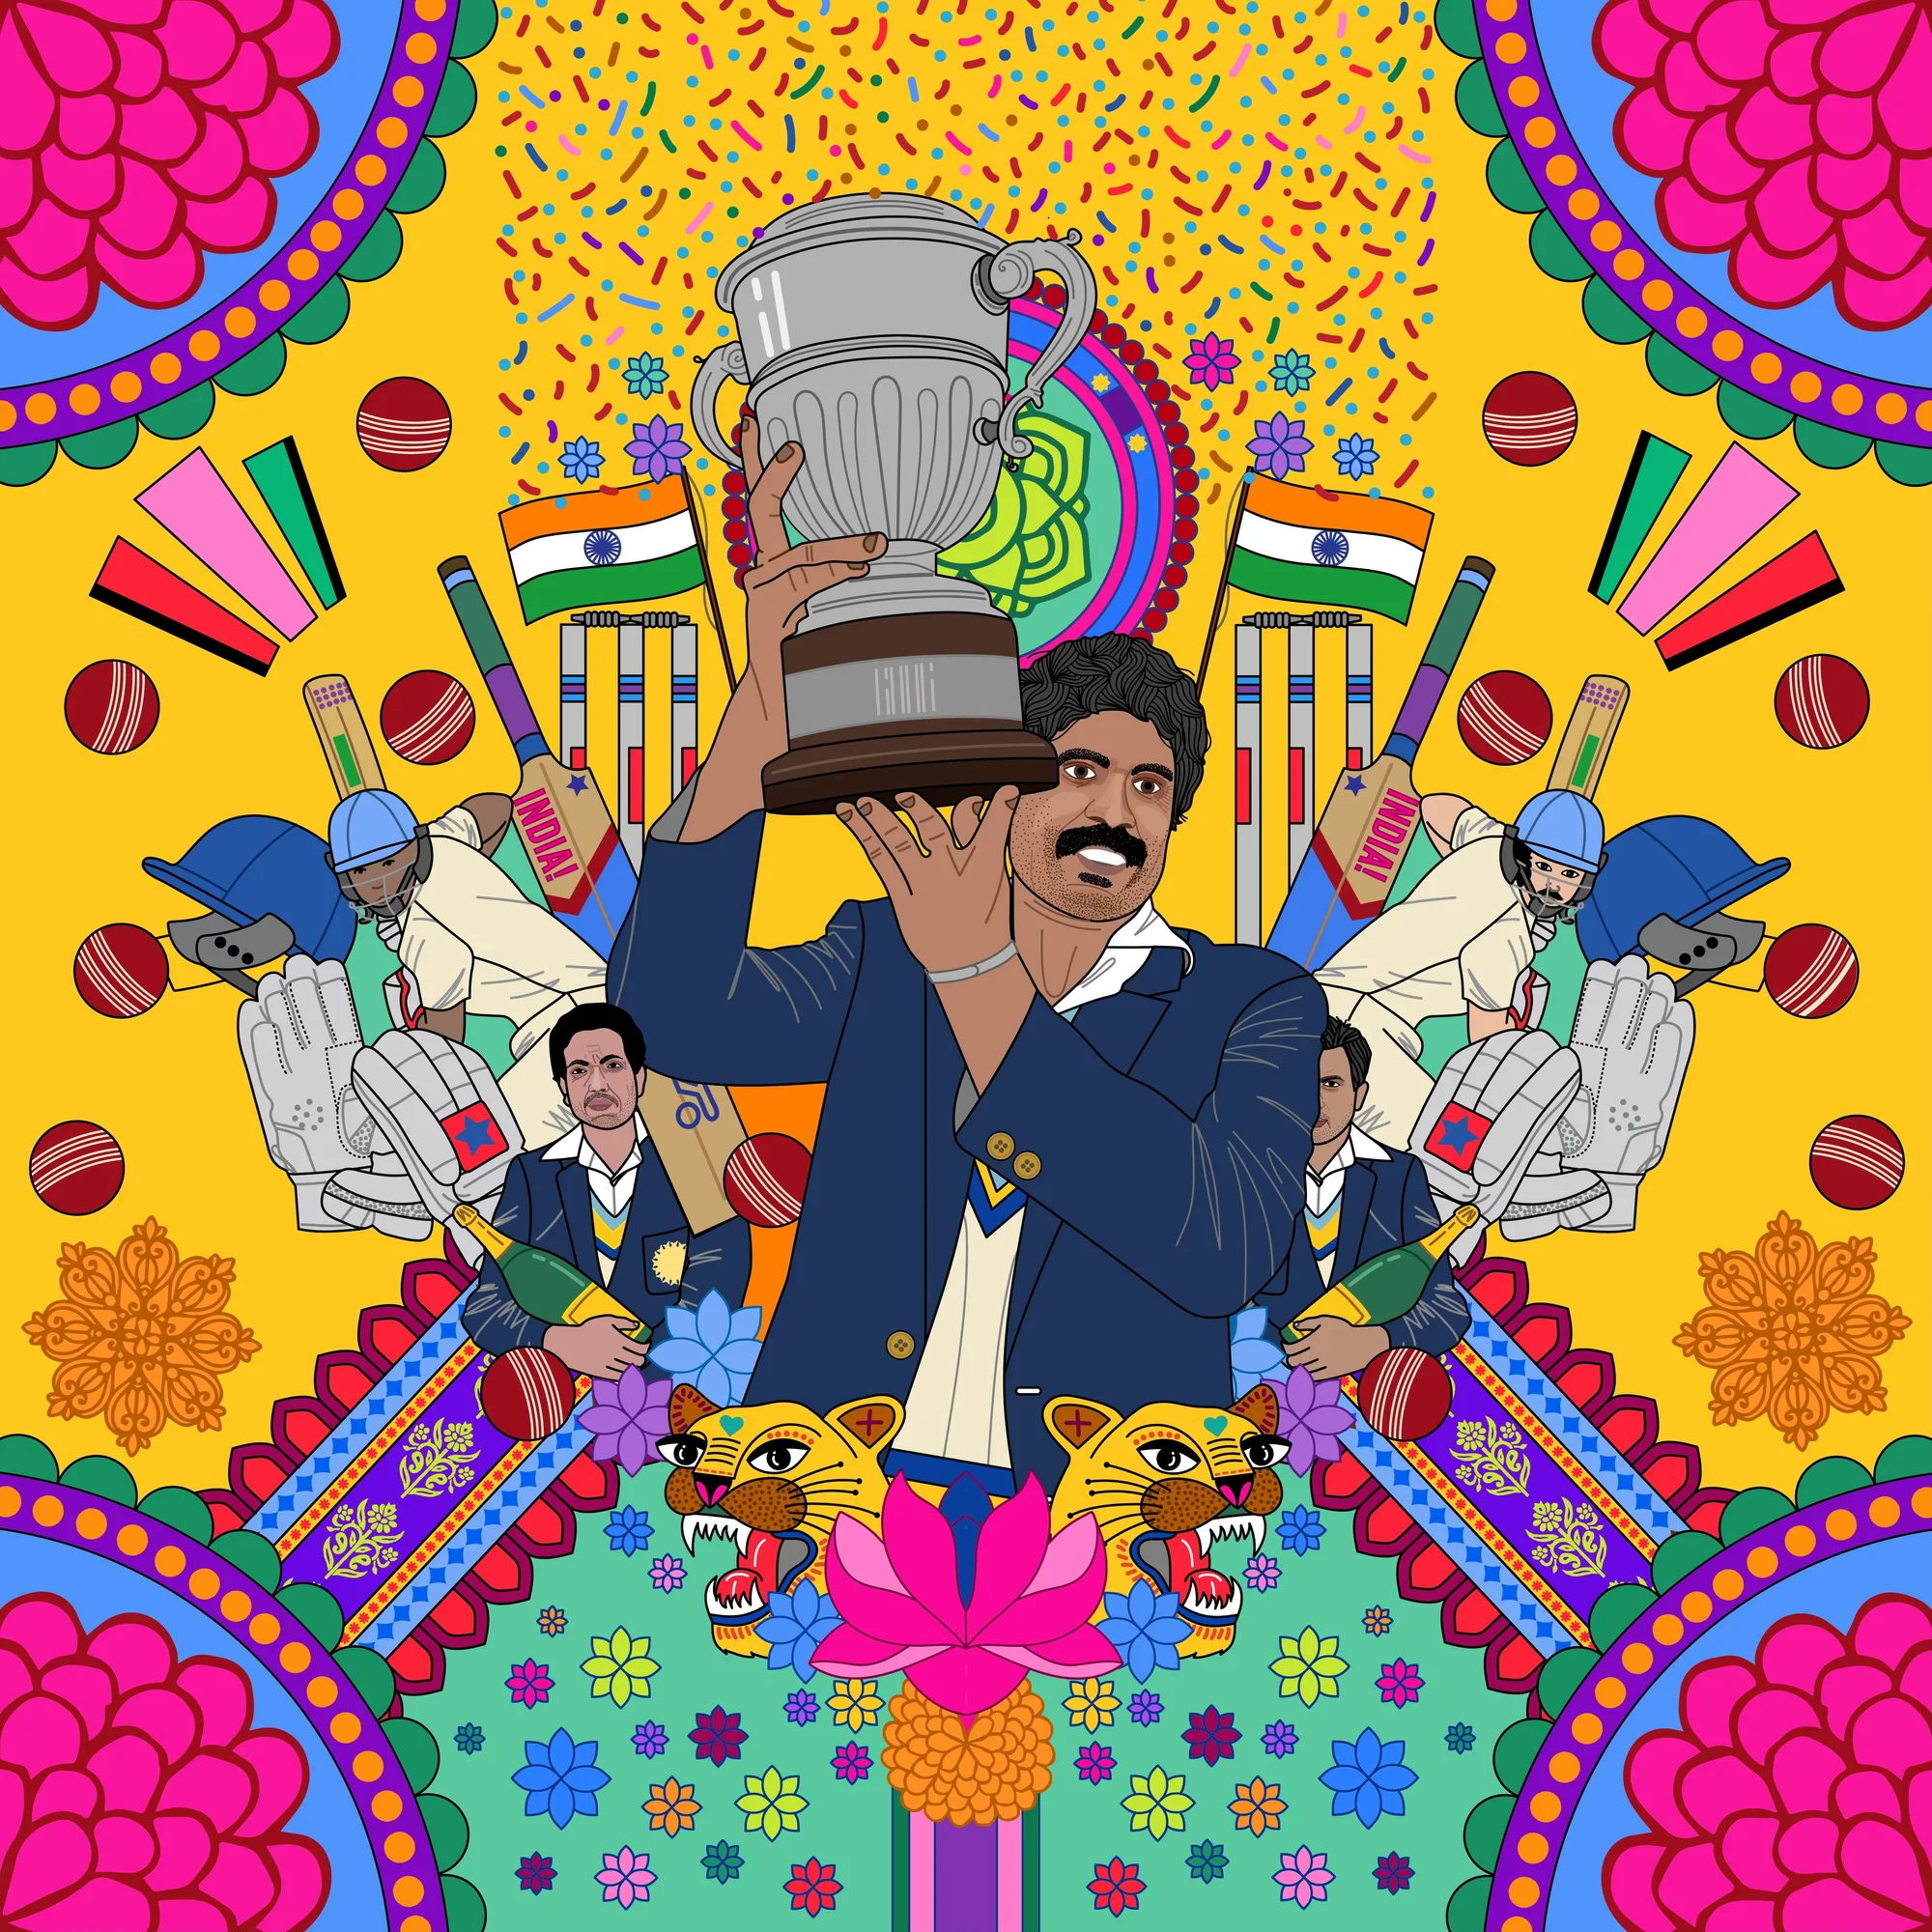 Illustration of a person in a suit holding a silver cup medal, against a colorful background of athletes, sports equipment, flowers, confetti, and traditional Indian patterns.